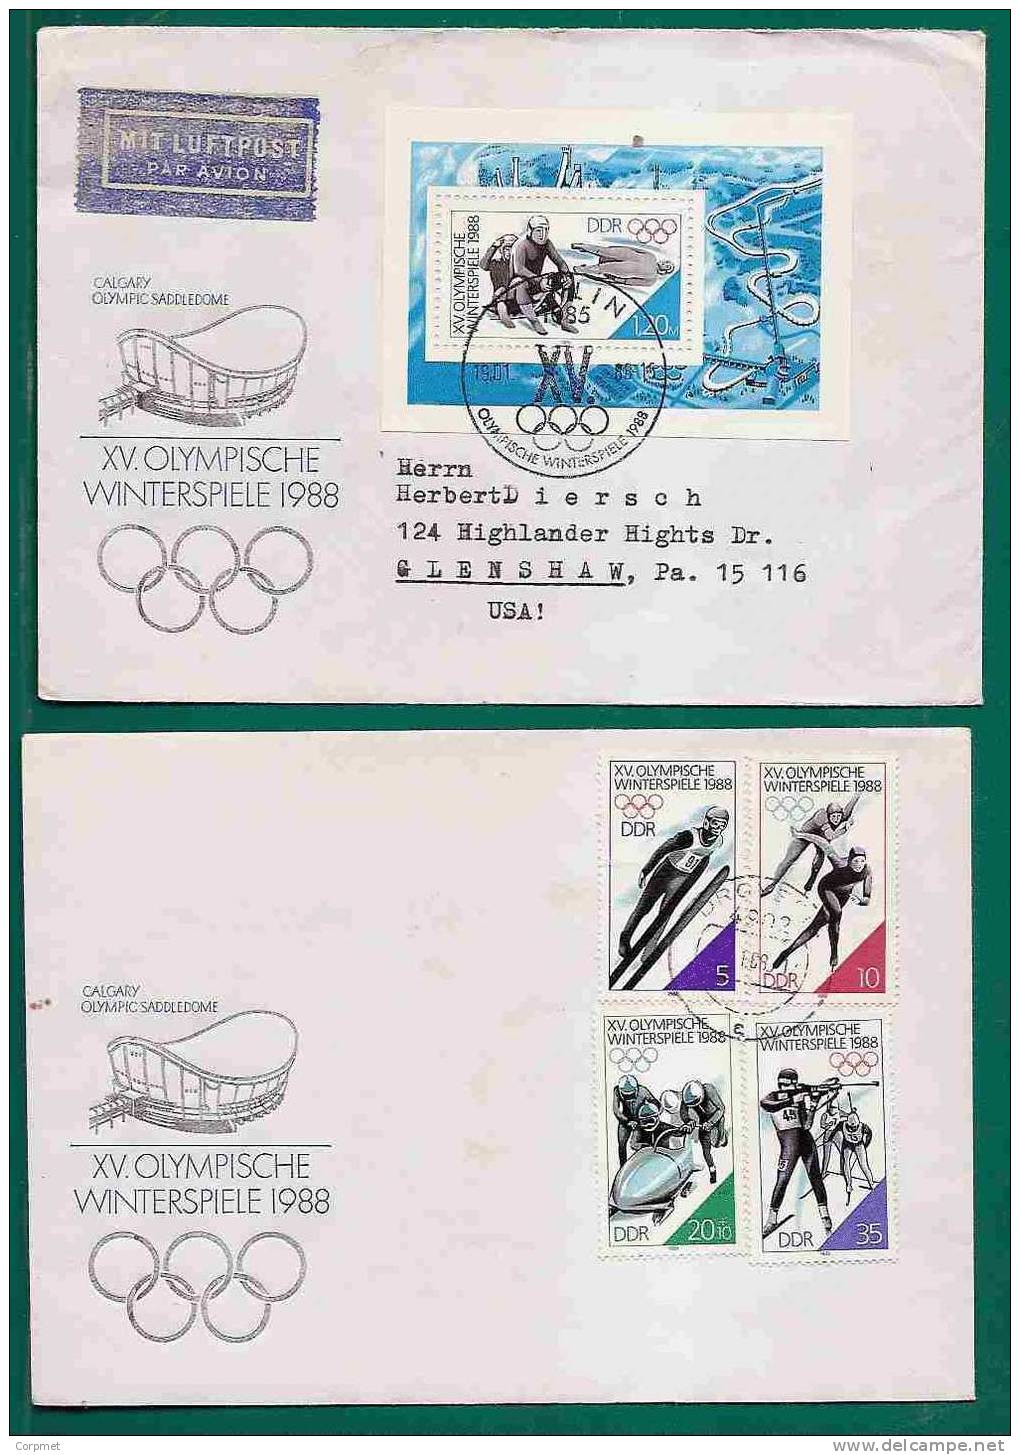 OLYMPIC GAMES - 1988 CALGARY - GERMANY DDR - VF 2 FIRST DAY COVERS - Yvert # 2754/7 And SOUVENIR SHEET # Bl 89 - Invierno 1988: Calgary